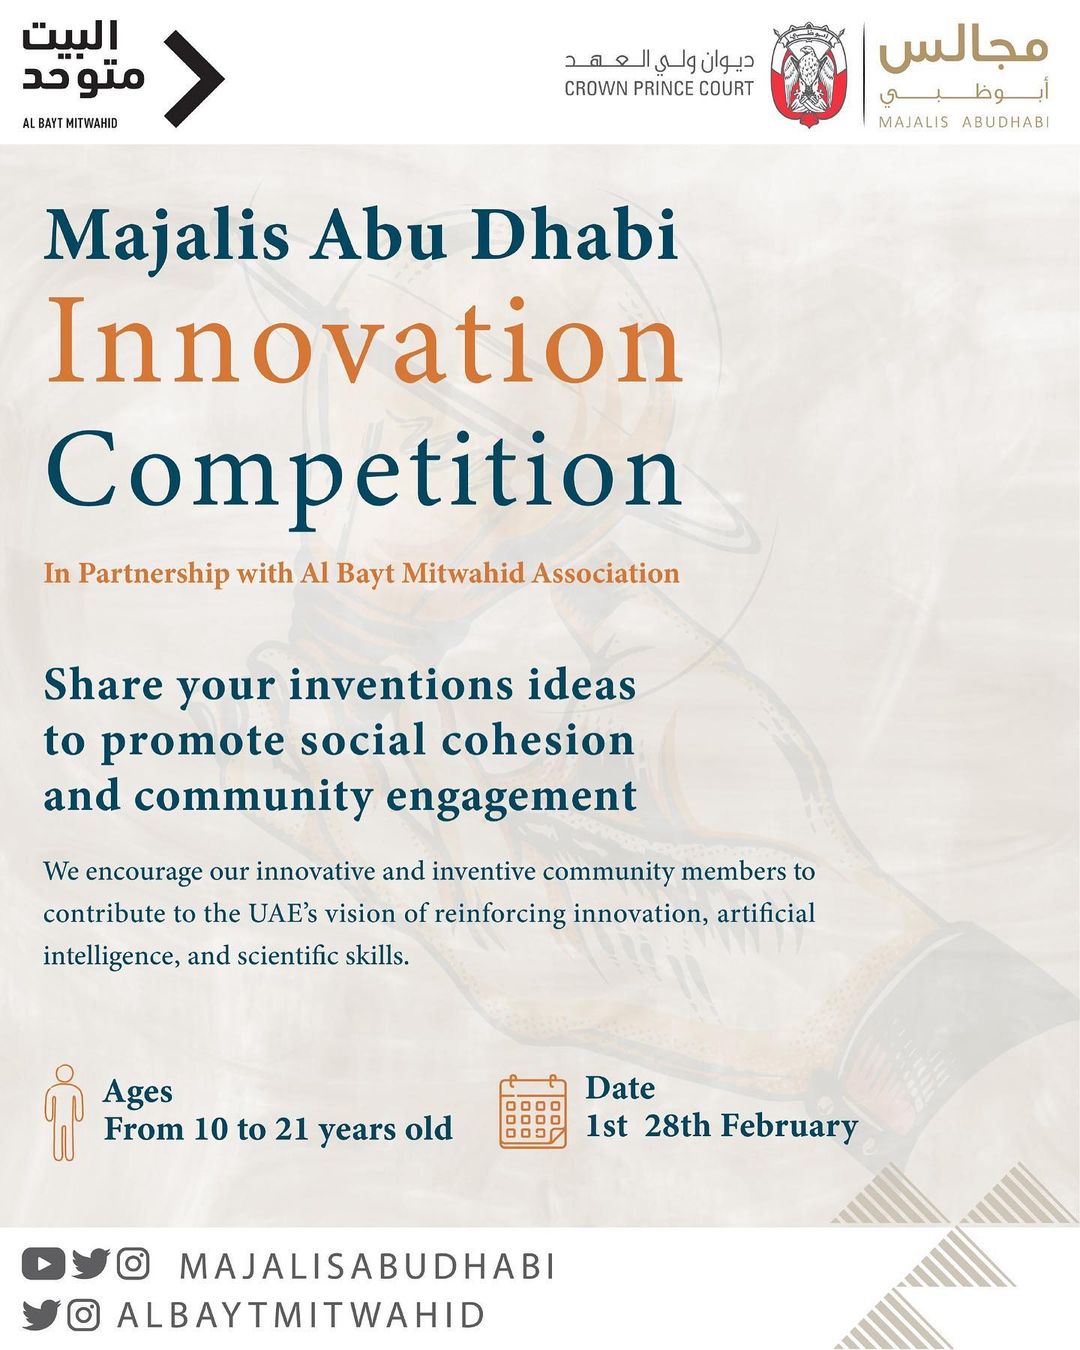 Majalis Abu Dhabi Launches Competition To Celebrate Innovation